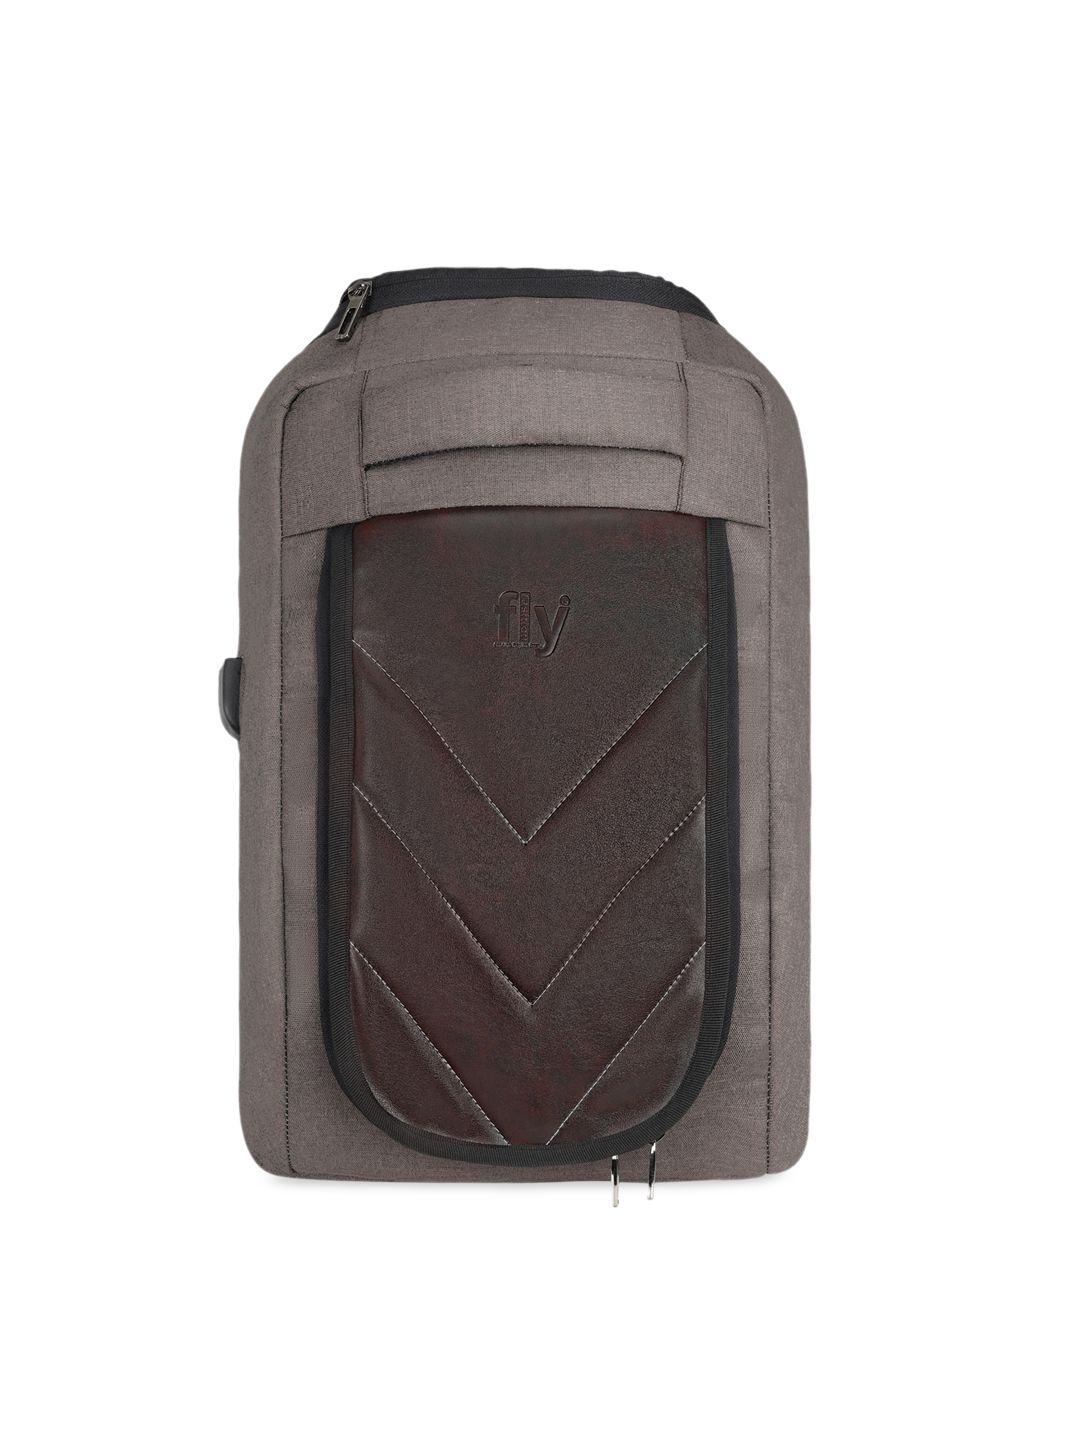 Fly Fashion Unisex Charcoal & Brown Colourblocked Backpack Price in India